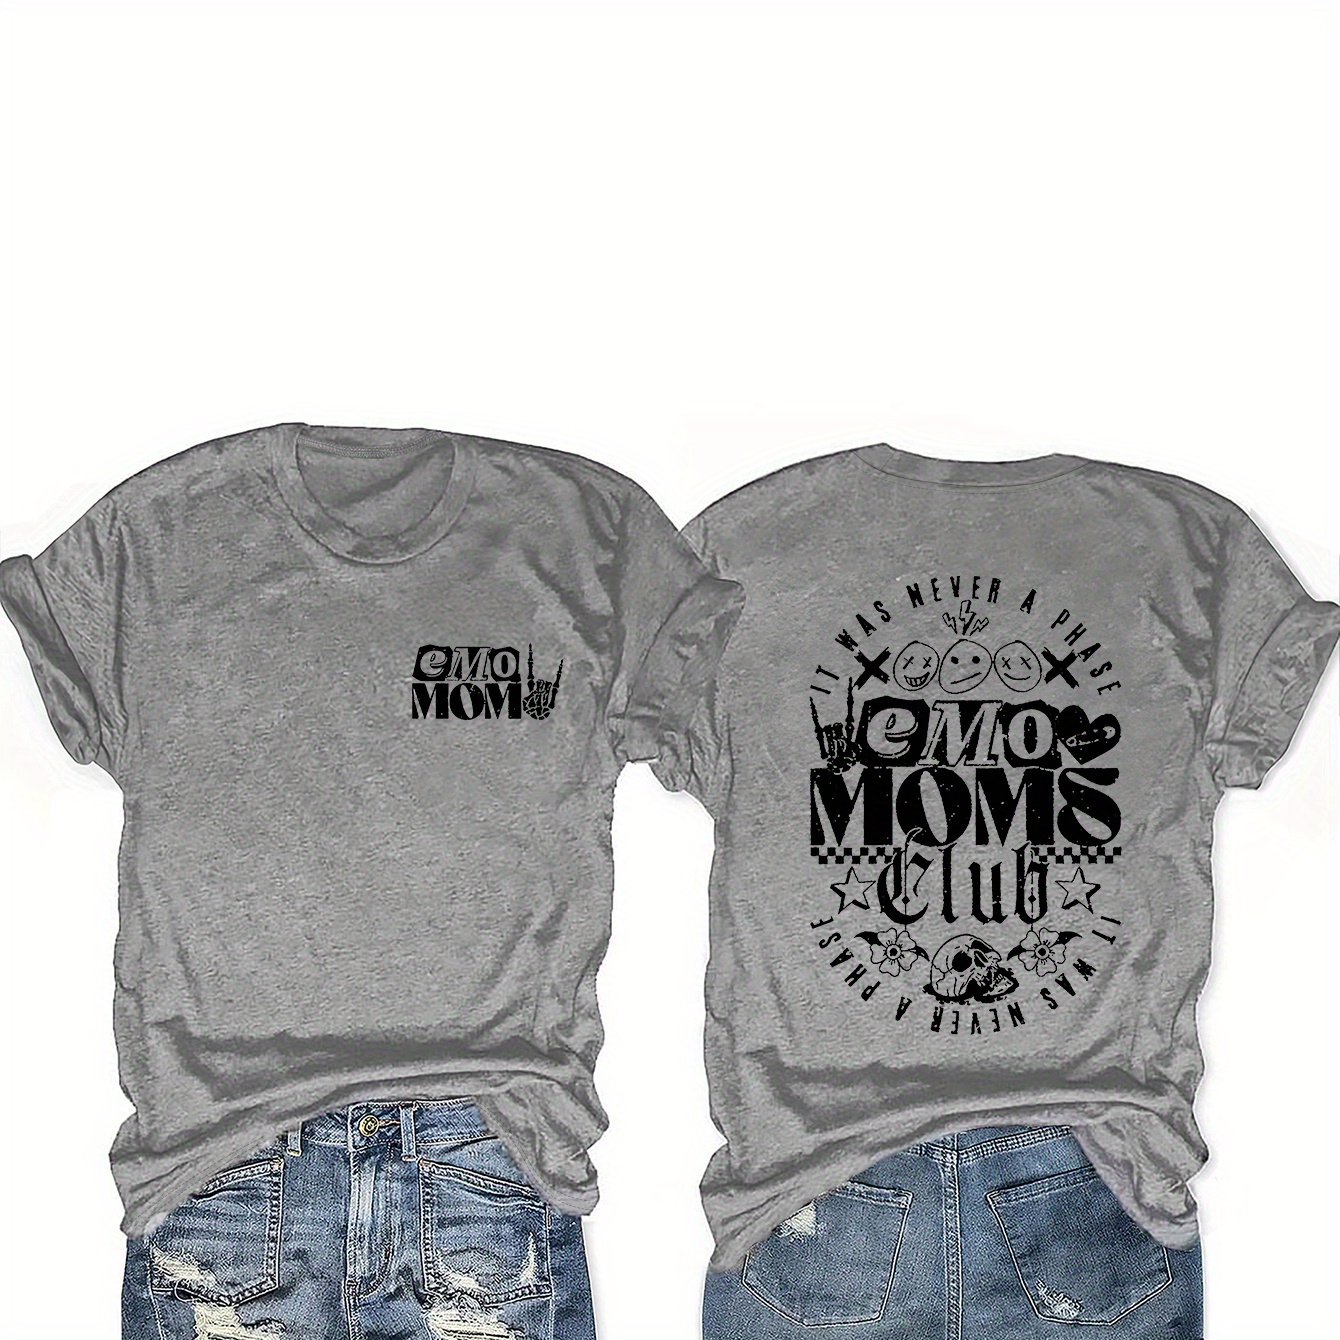 

Emo Mom Print T-shirt, Short Sleeve Crew Neck Casual Top For Summer & Spring, Women's Clothing